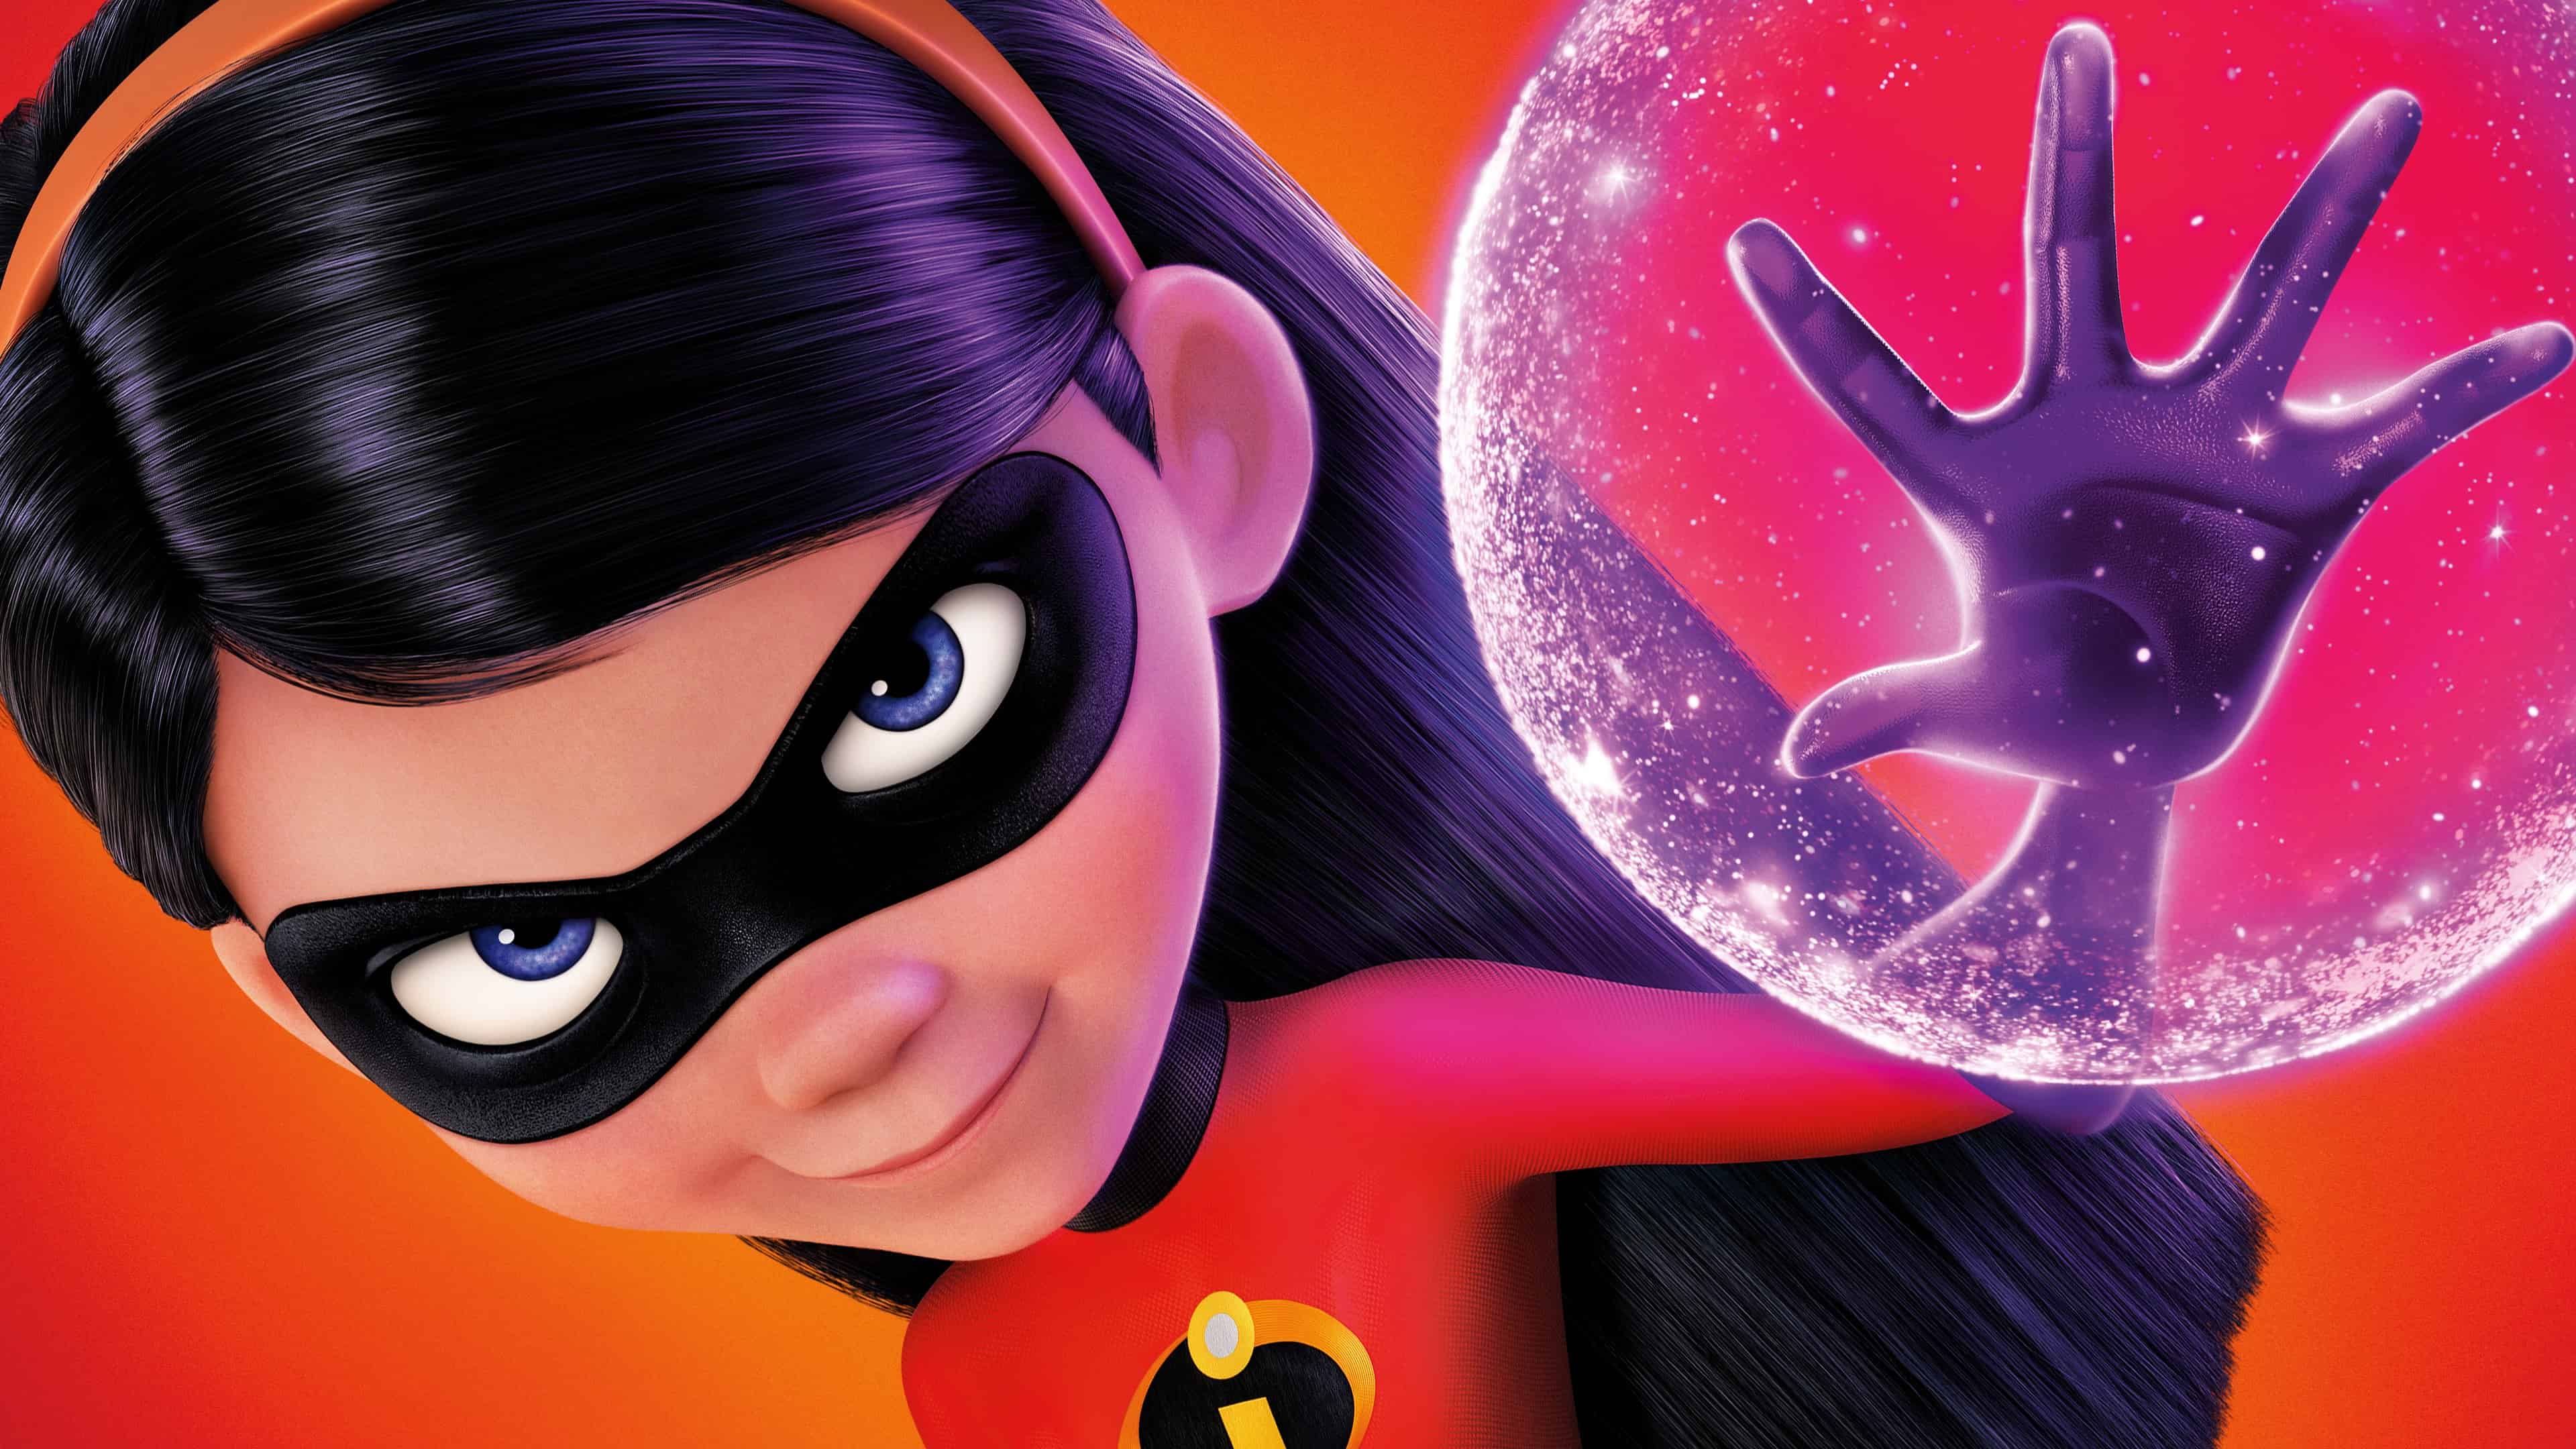 Details 84+ the incredibles wallpaper latest - in.coedo.com.vn